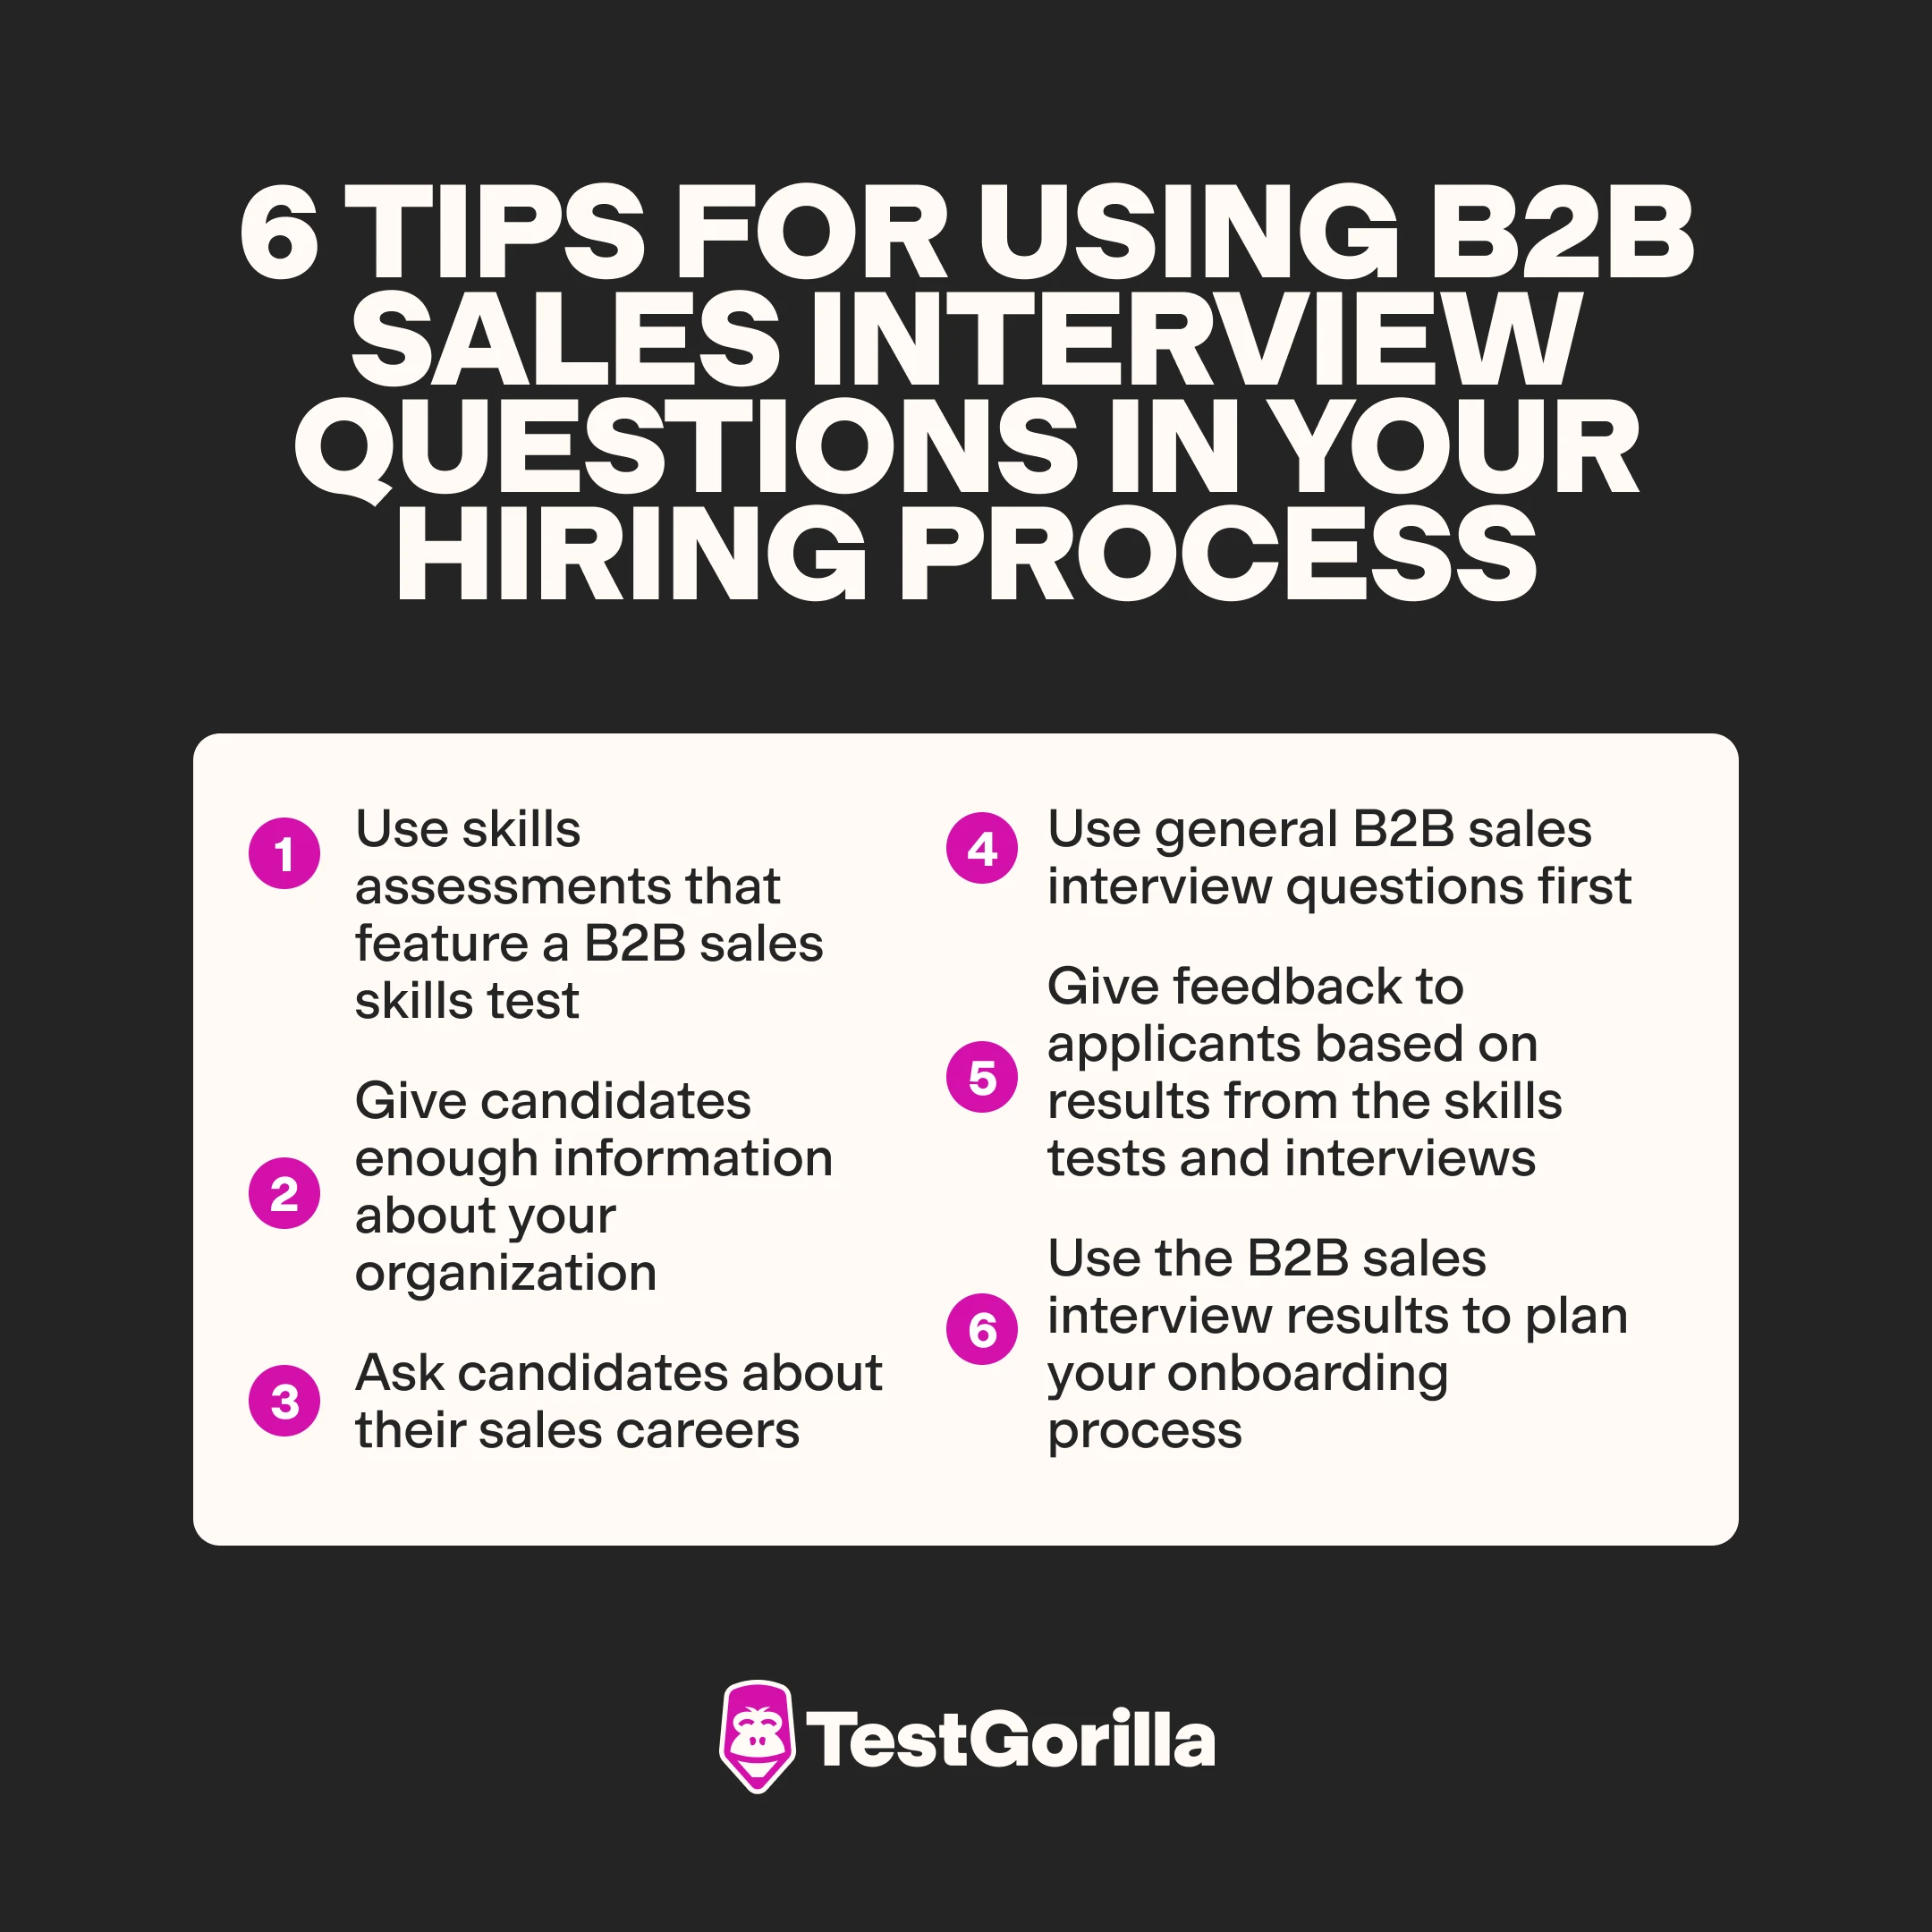 image listing 7 tips for using B2B sales interview questions in your hiring process 